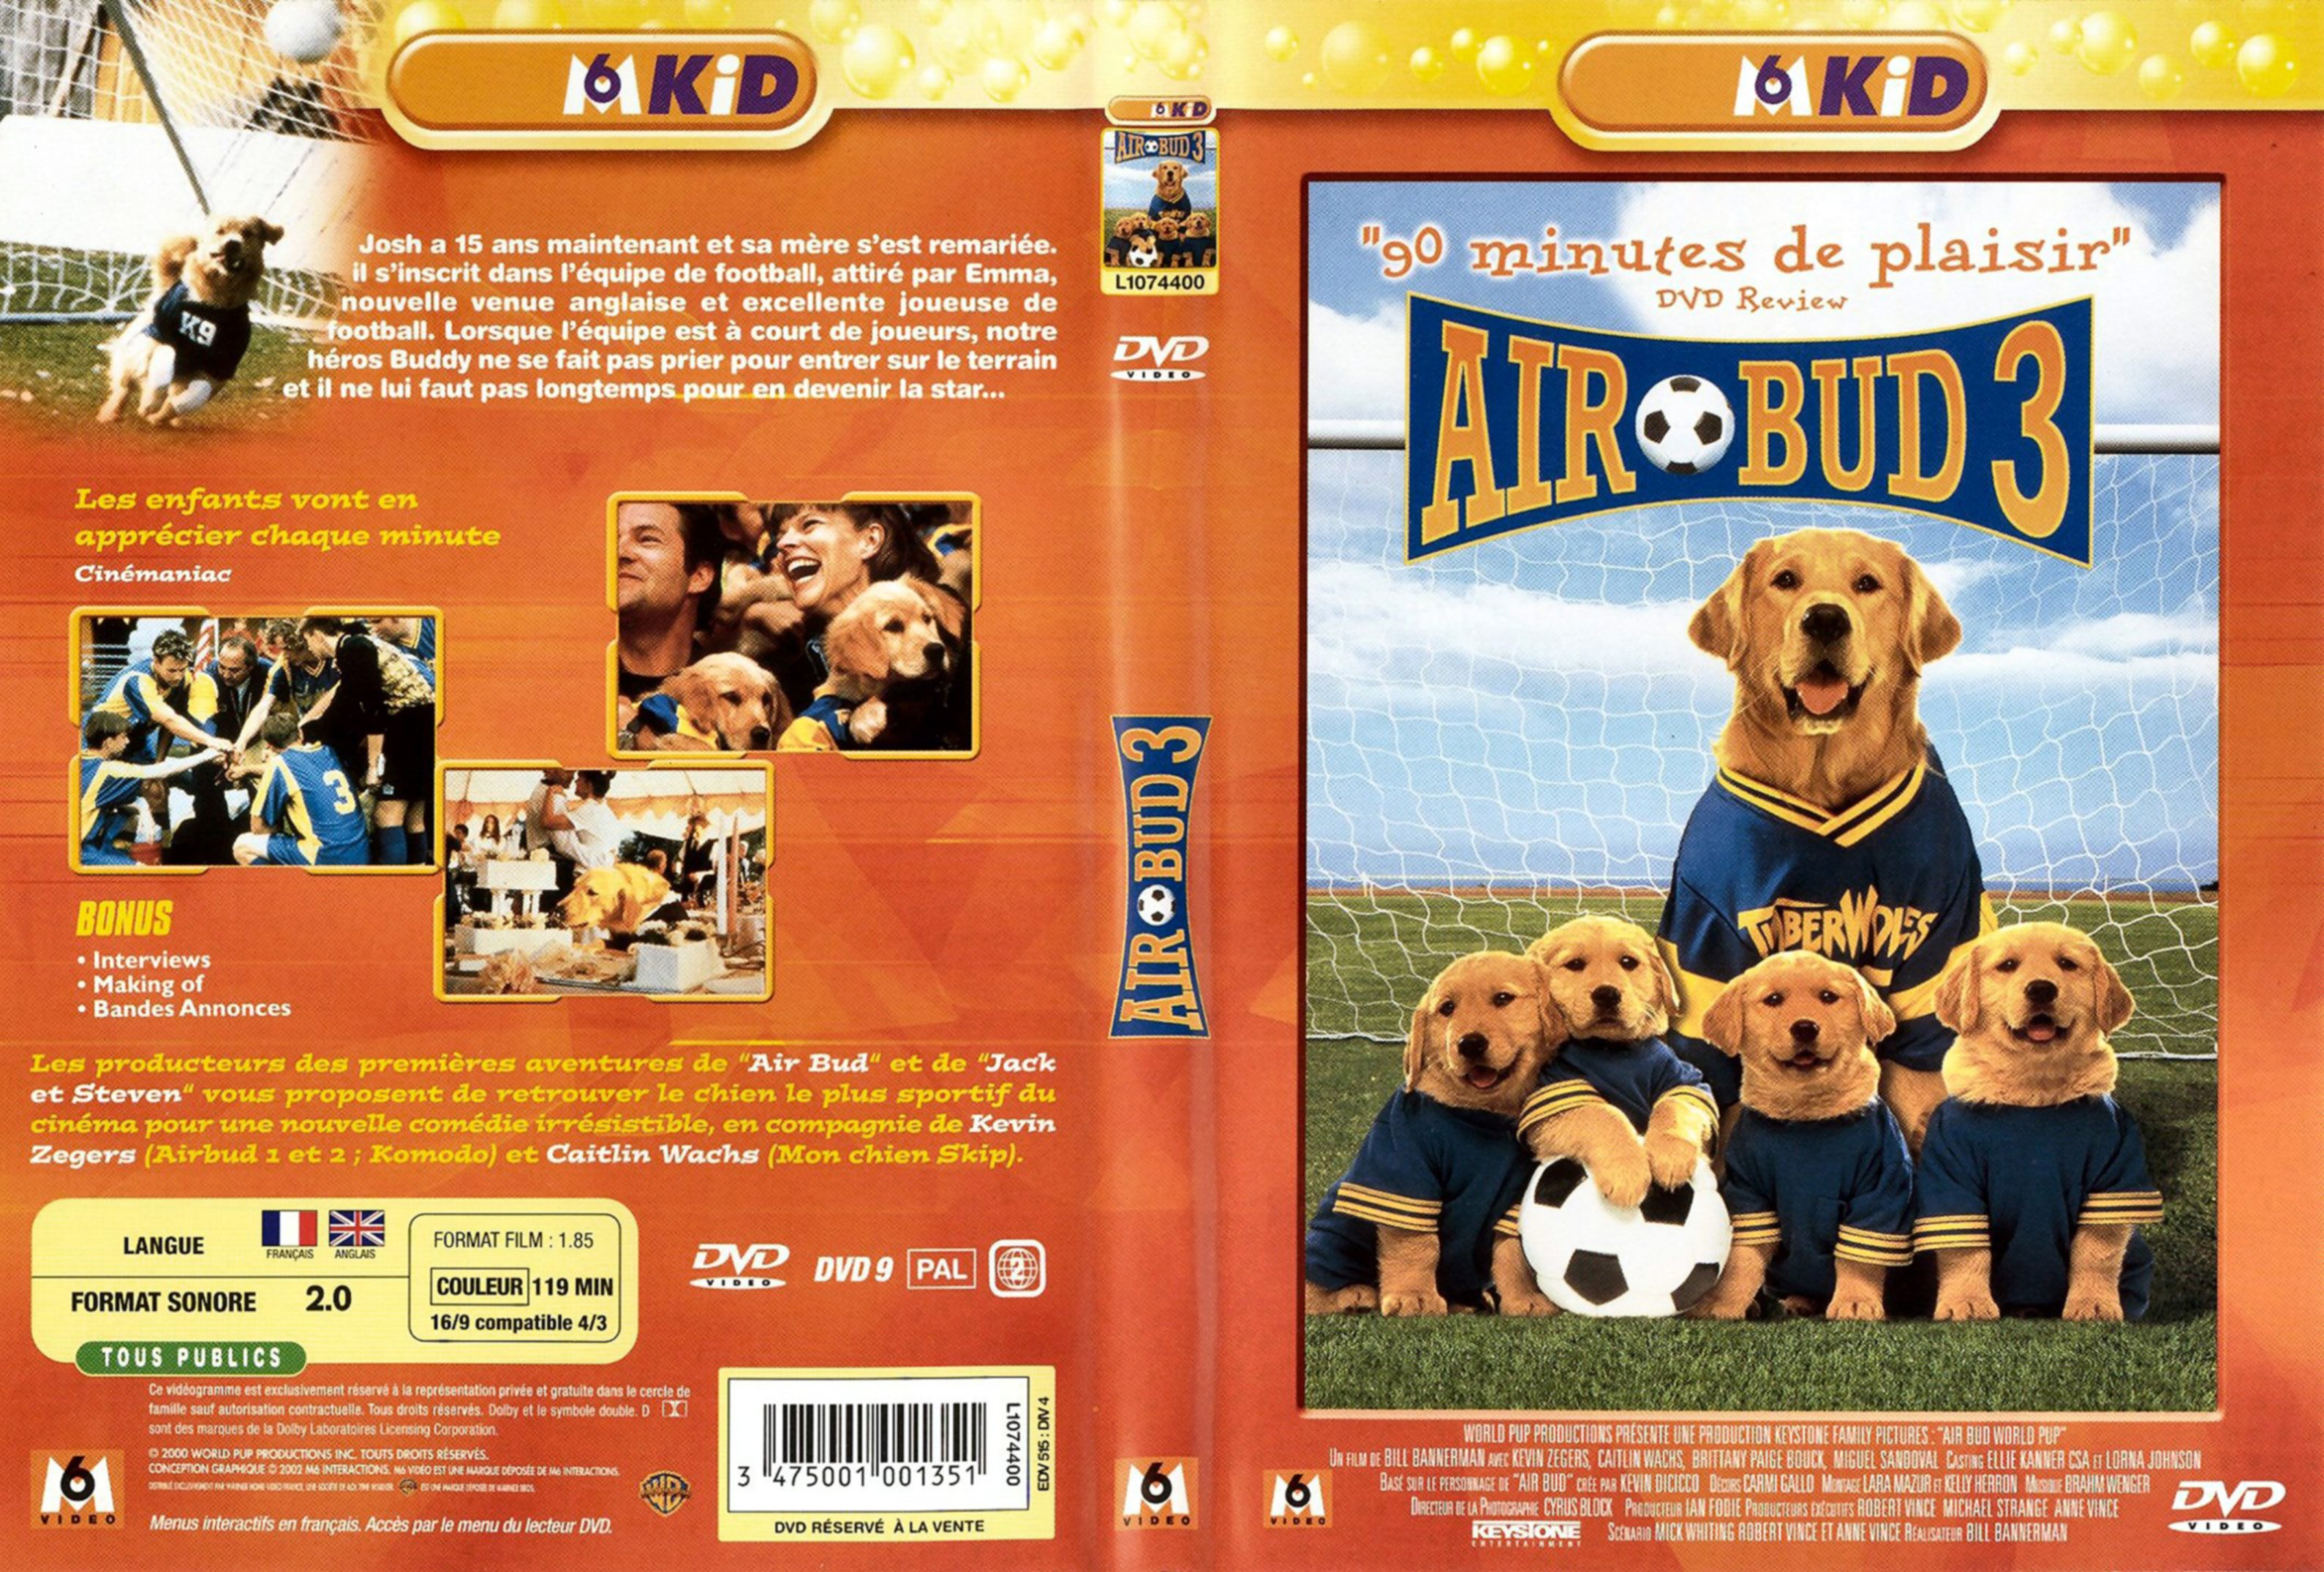 Jaquette DVD Air bud 3